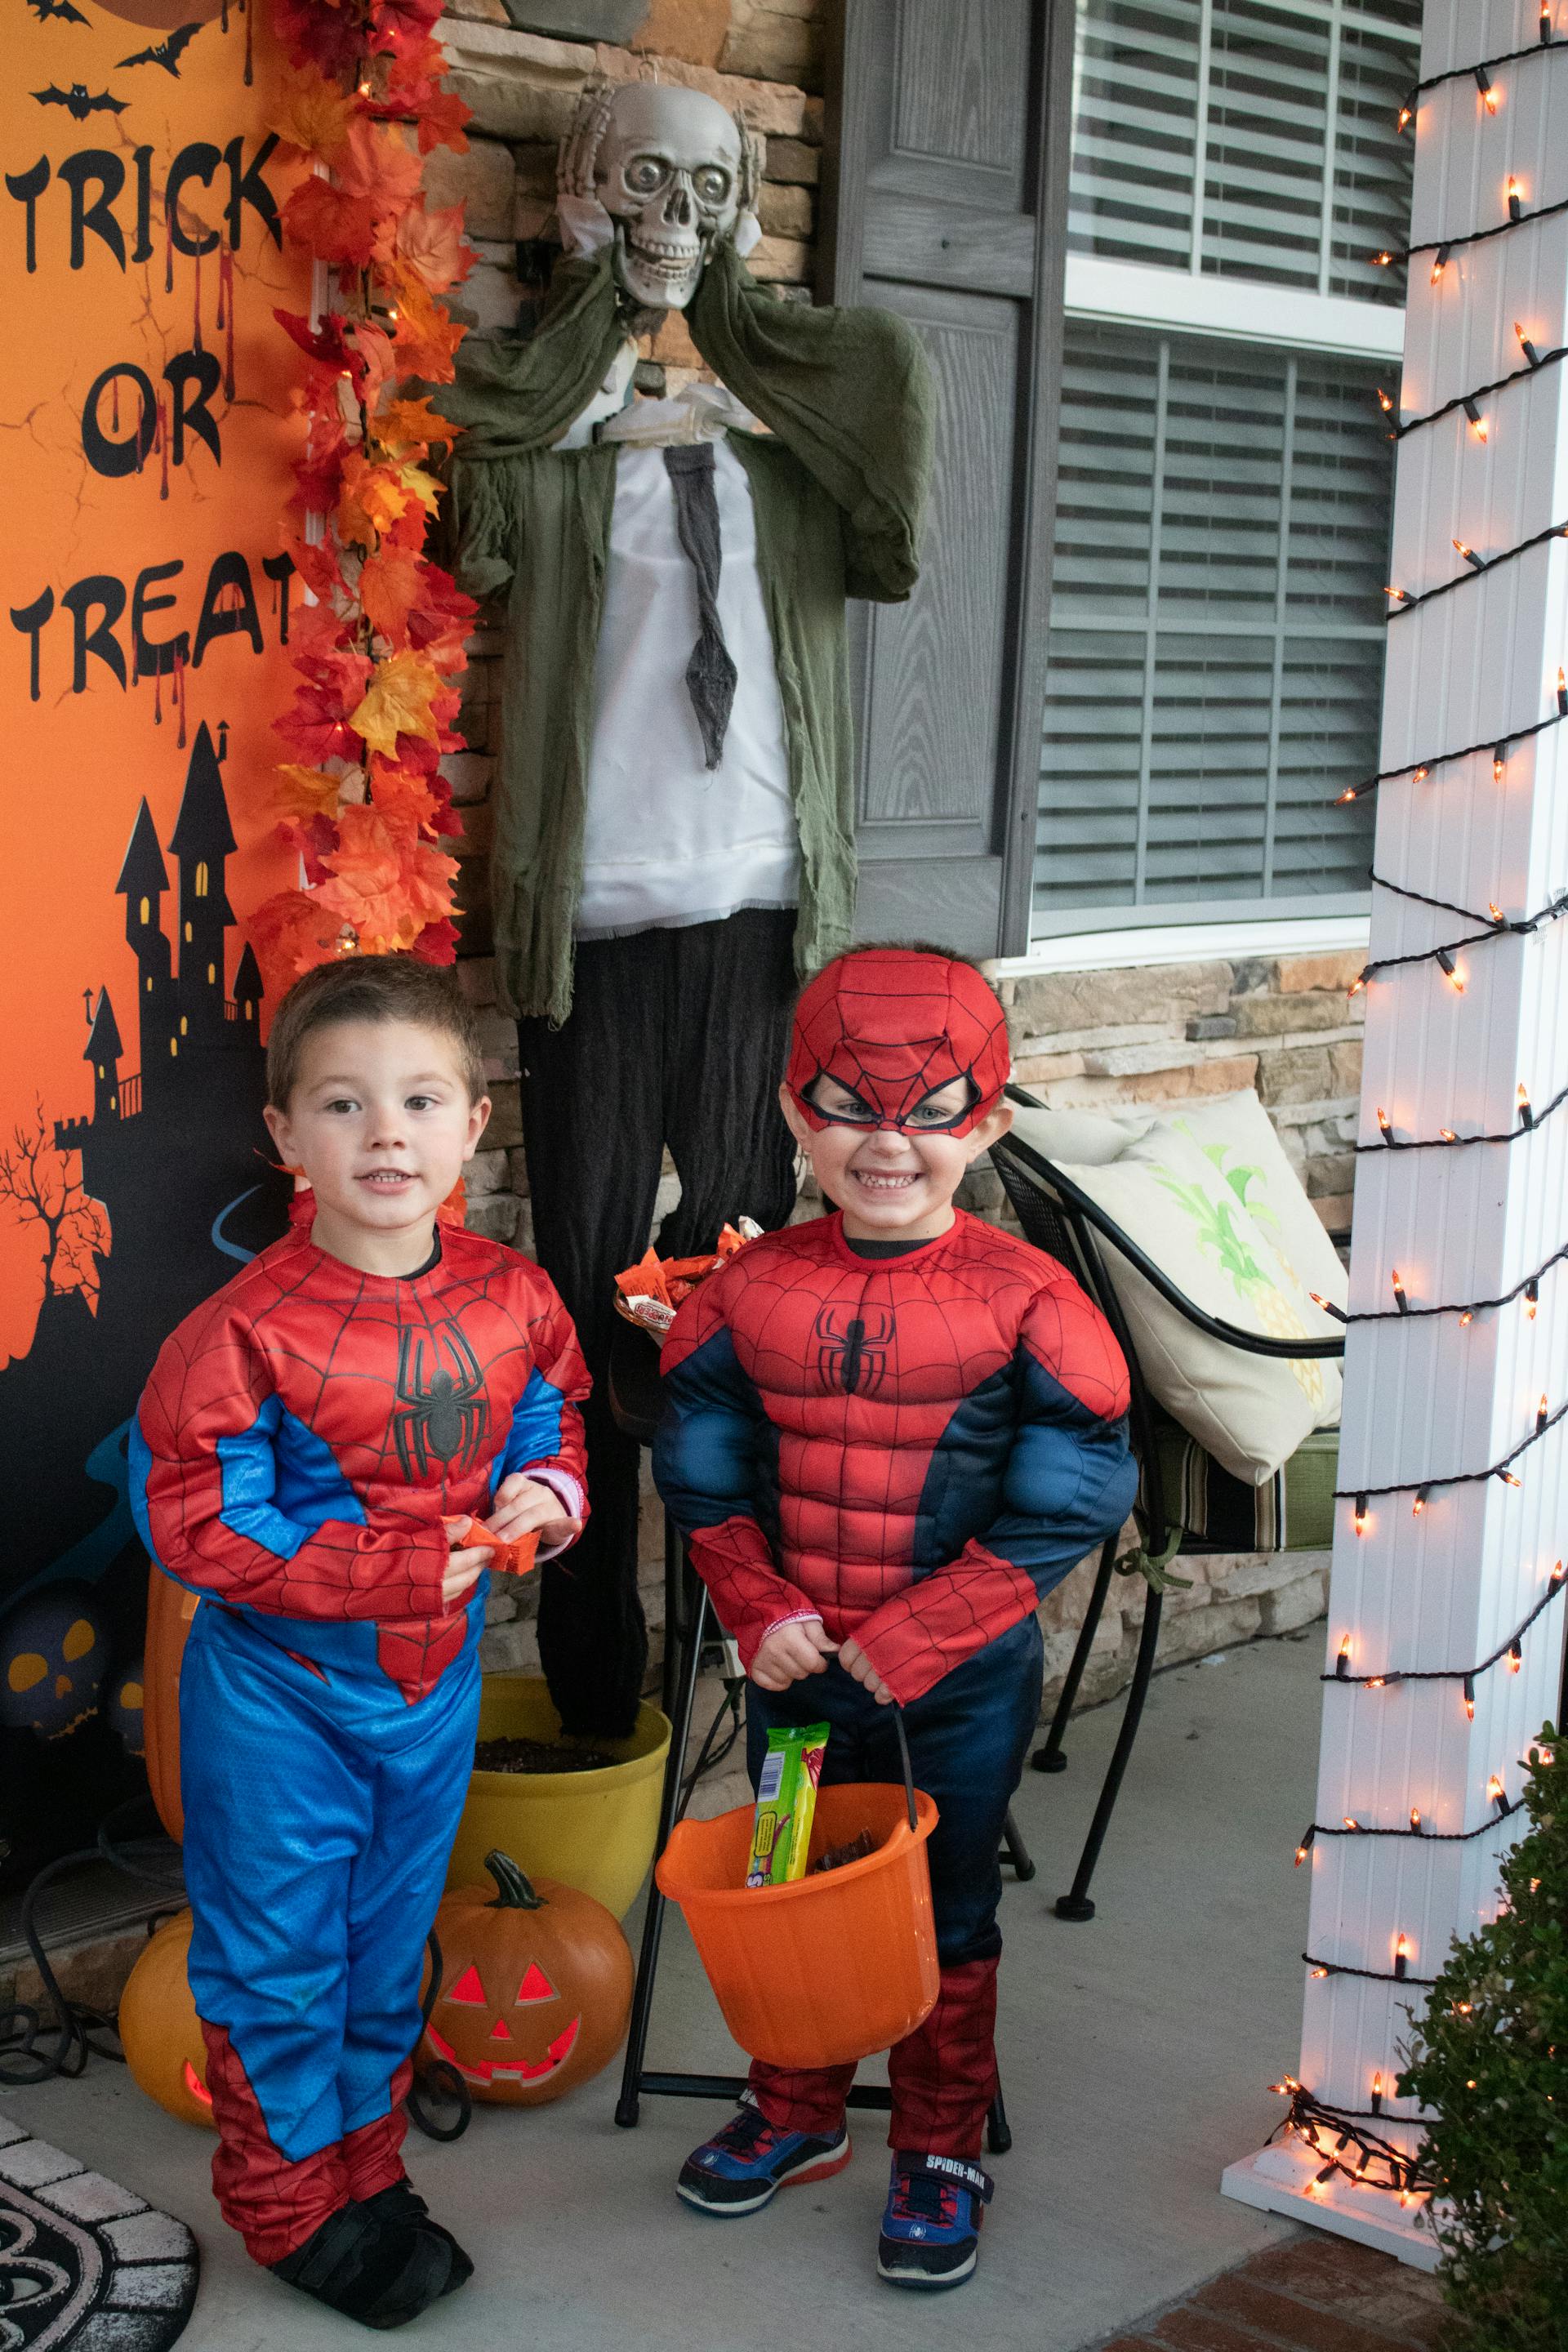 Two little boys dressed in Spiderman costumes for Halloween | Source: Pexels